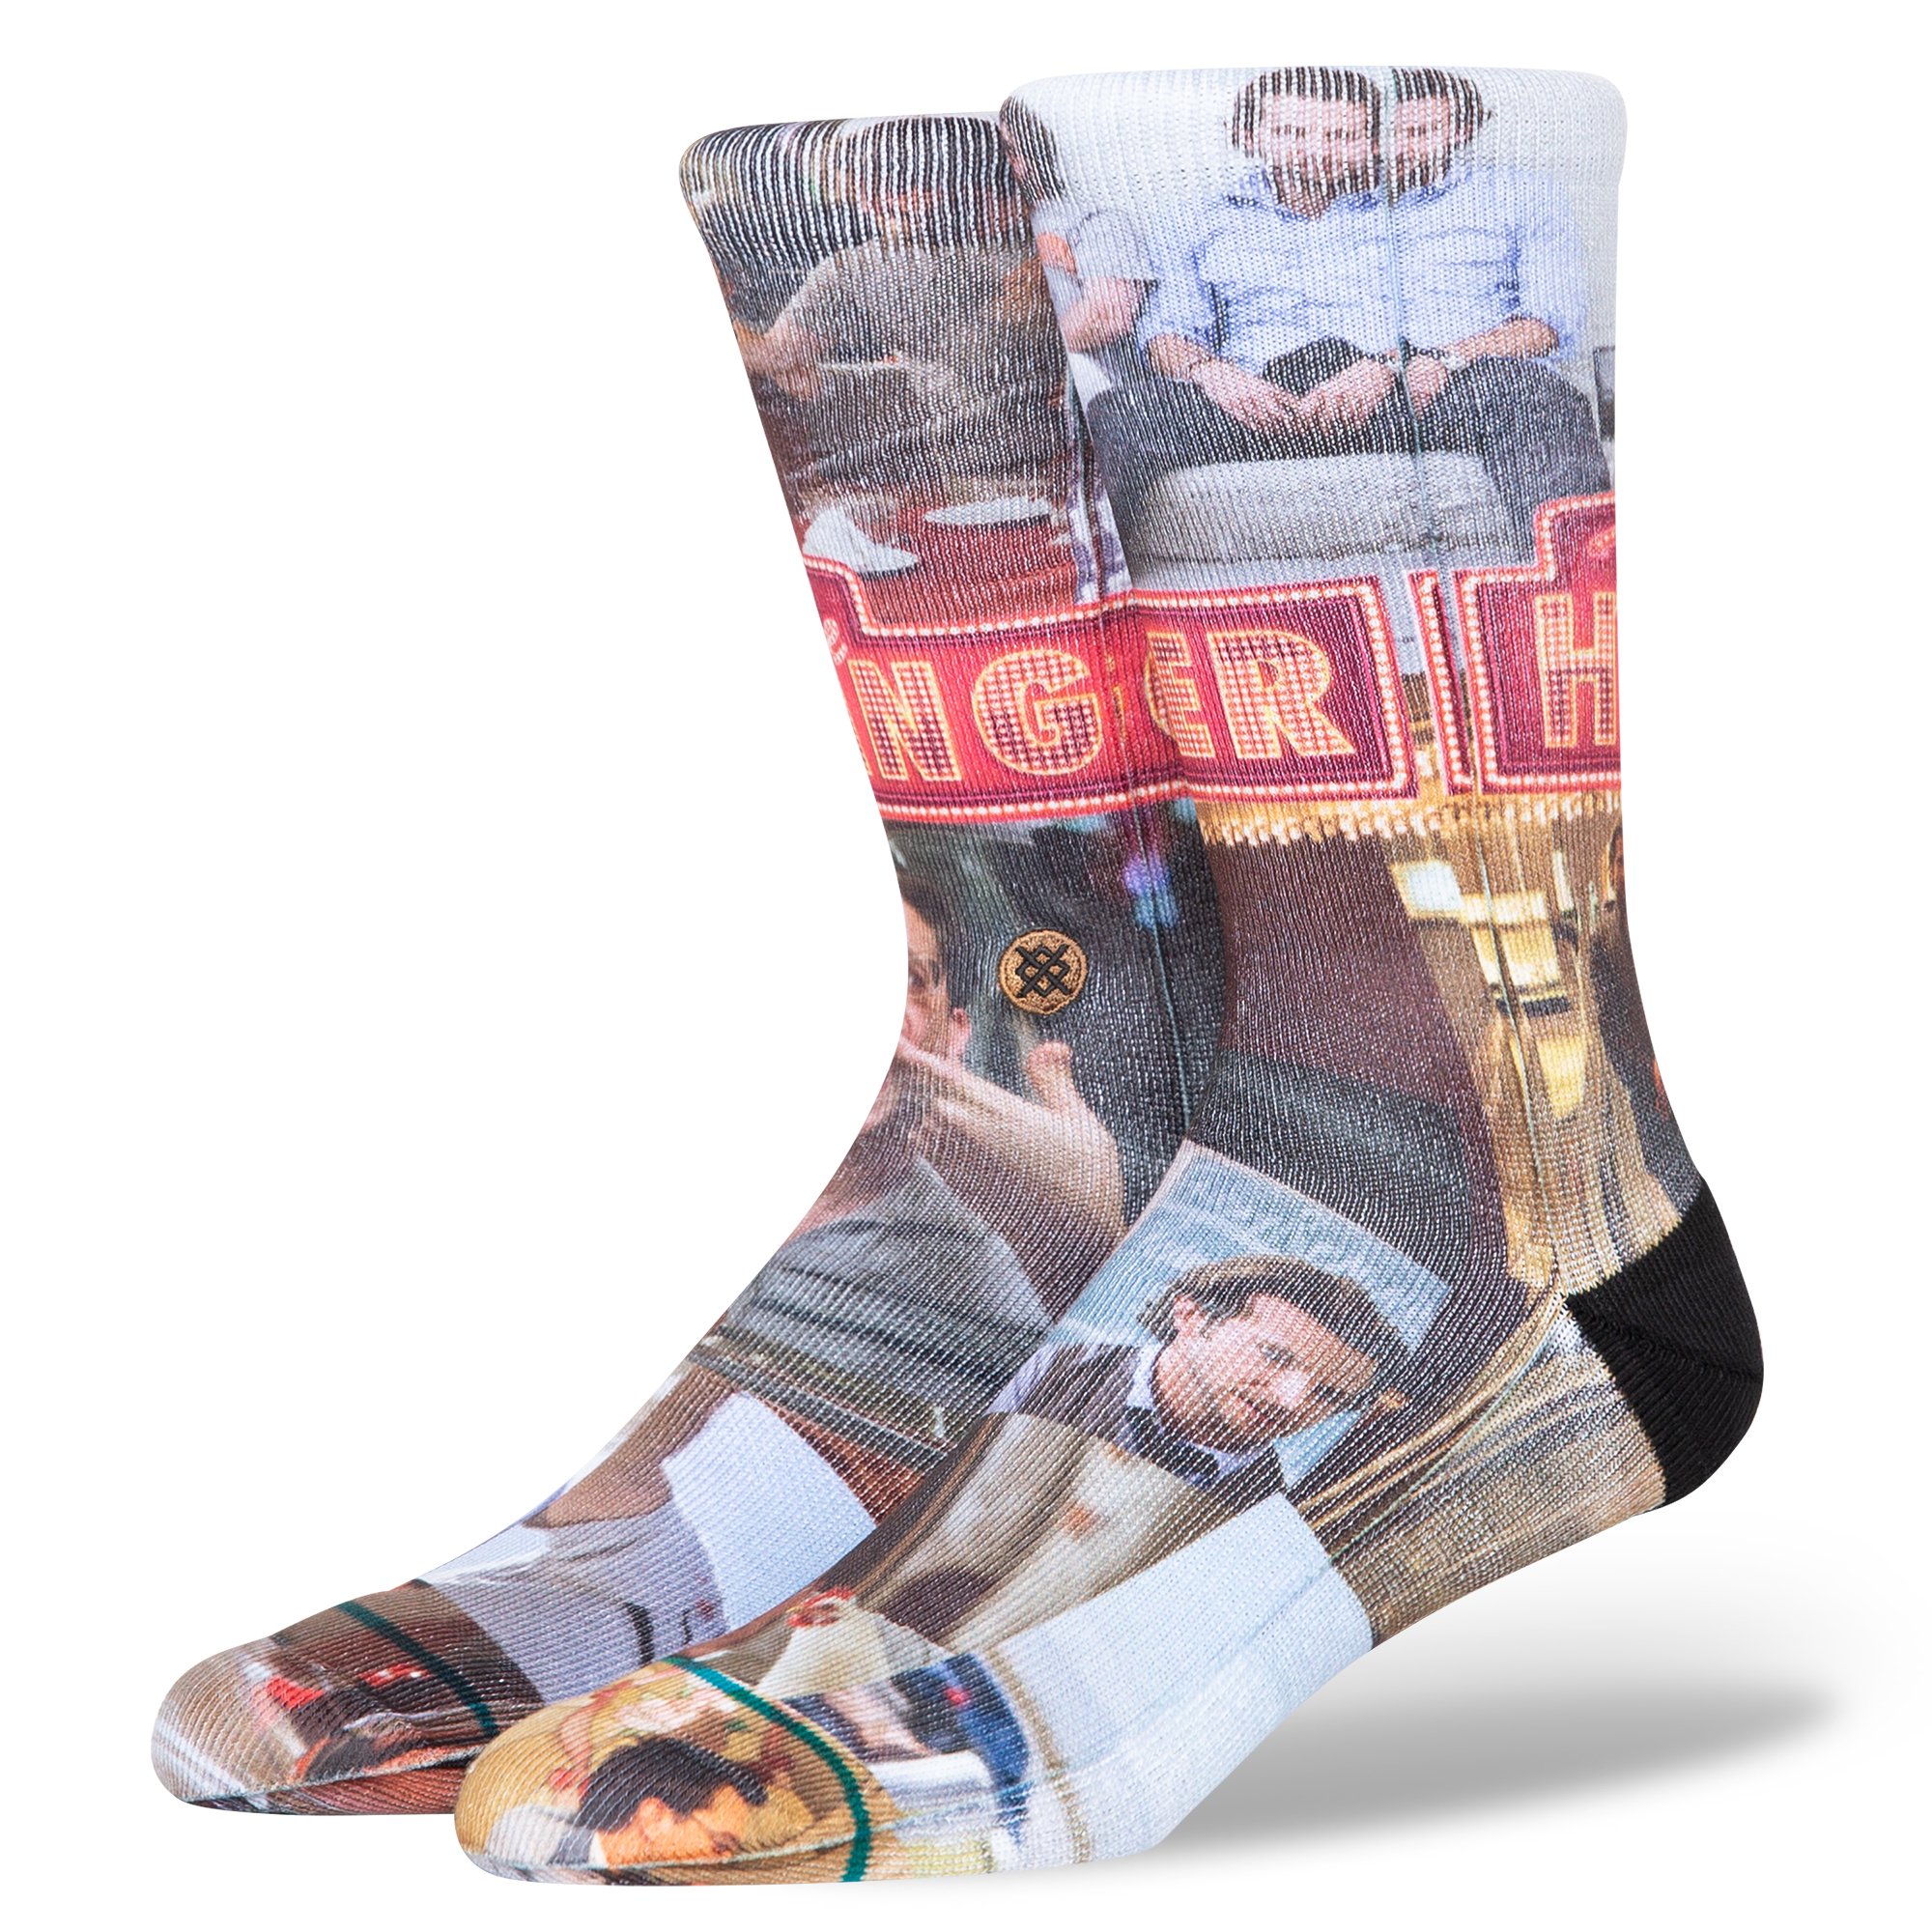 The Hangover X Stance What Happened Poly Crew Socks